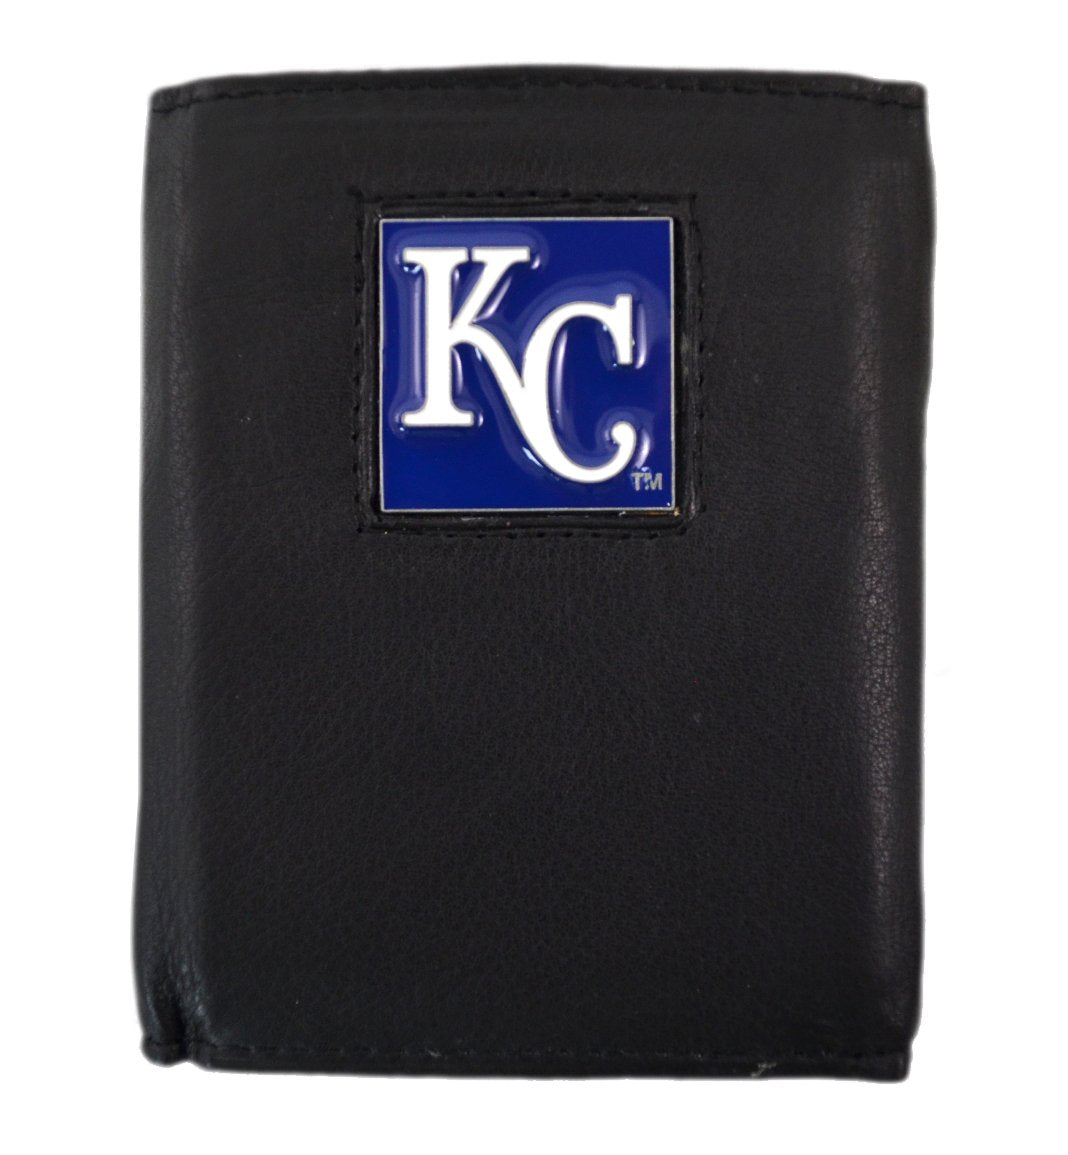 Official Major League Baseball Fan Shop Authentic Genuine Leather MLB Trifold Wallet and Key Chain Bundled Set